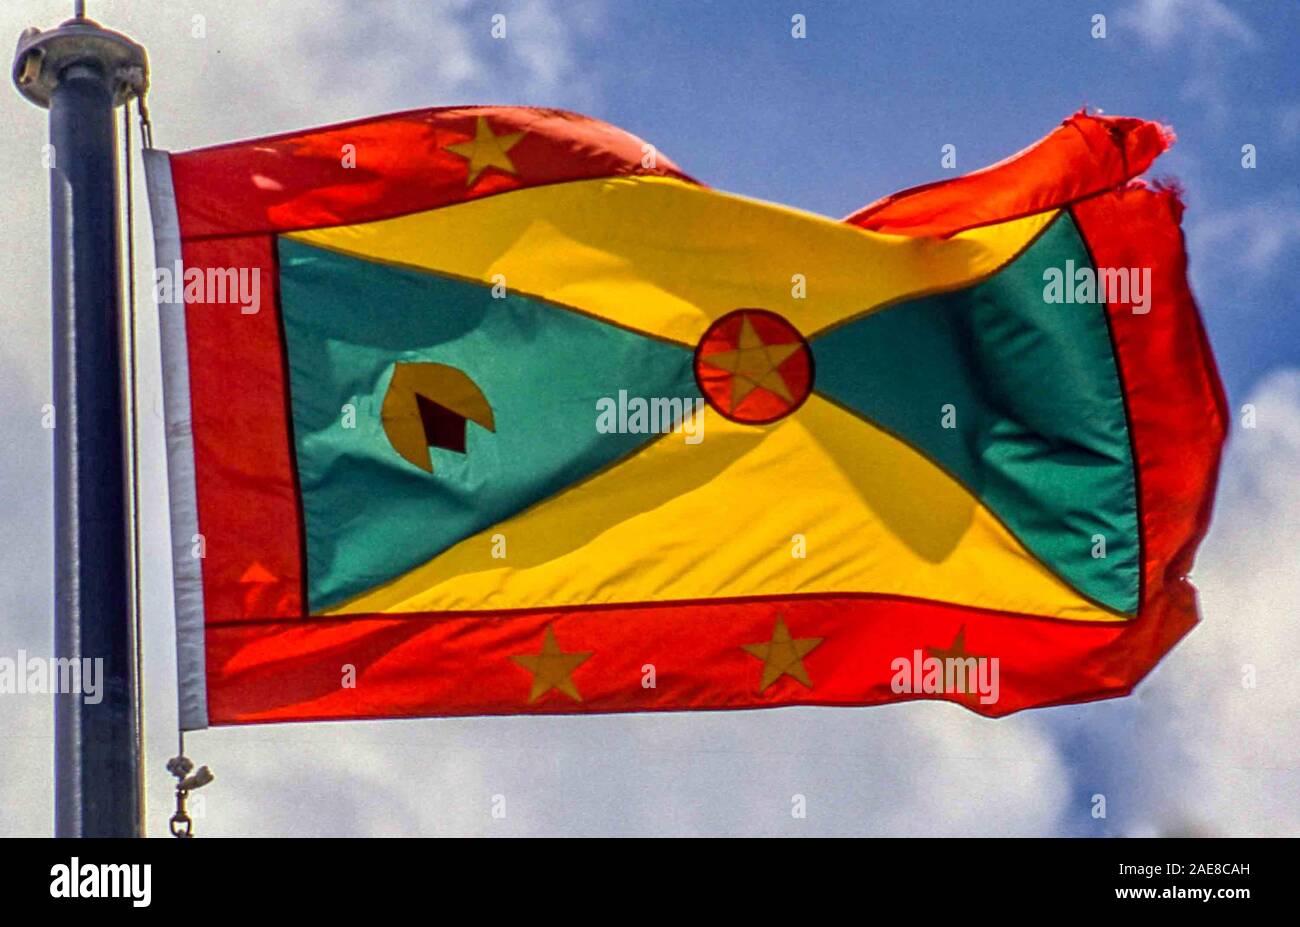 St Gerorge'S, Grenada. 13th Apr, 2000. Flag of the soveriegn Caribbean country of Grenada. Credit: Arnold Drapkin/ZUMA Wire/Alamy Live News Stock Photo